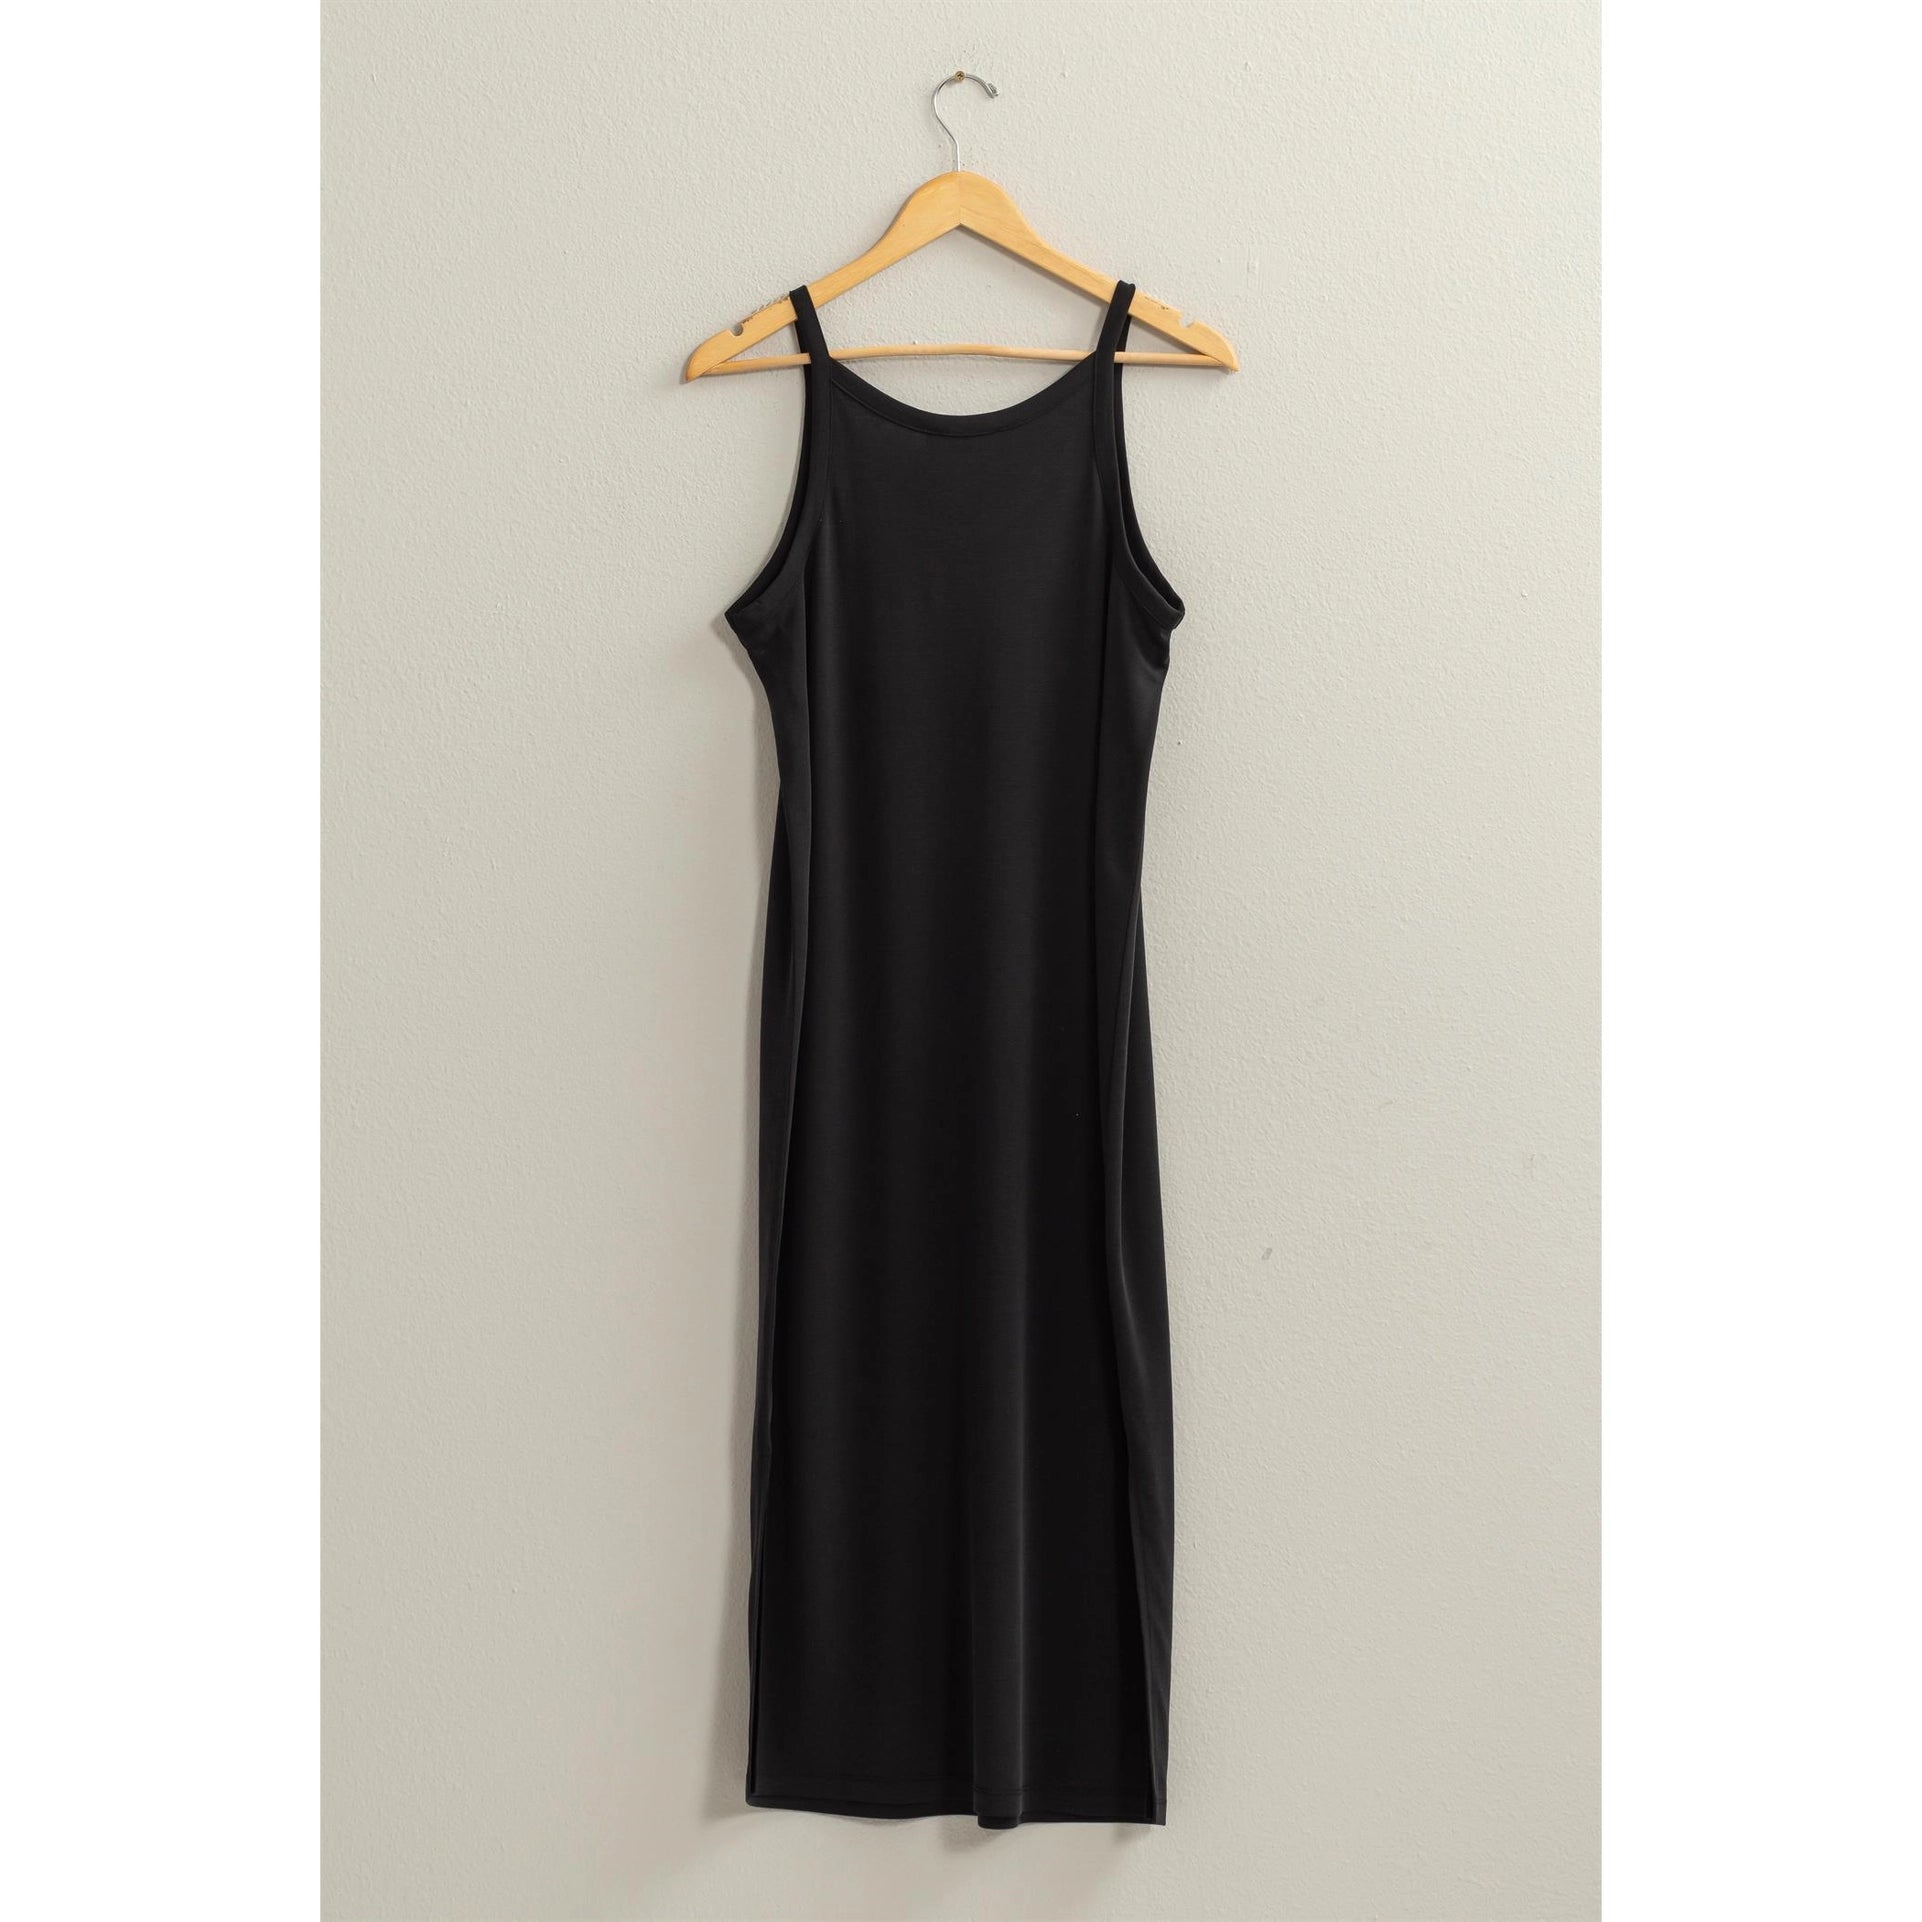 Robin V-Neck Midi DressArm yourself some style points this season with this cute midi dress. Designed from a soft fabric, it has a relaxed fit that's perfect for laid-back days, boasting a V-neck and shoulder straps. Twin side slits offer a flowy style. S